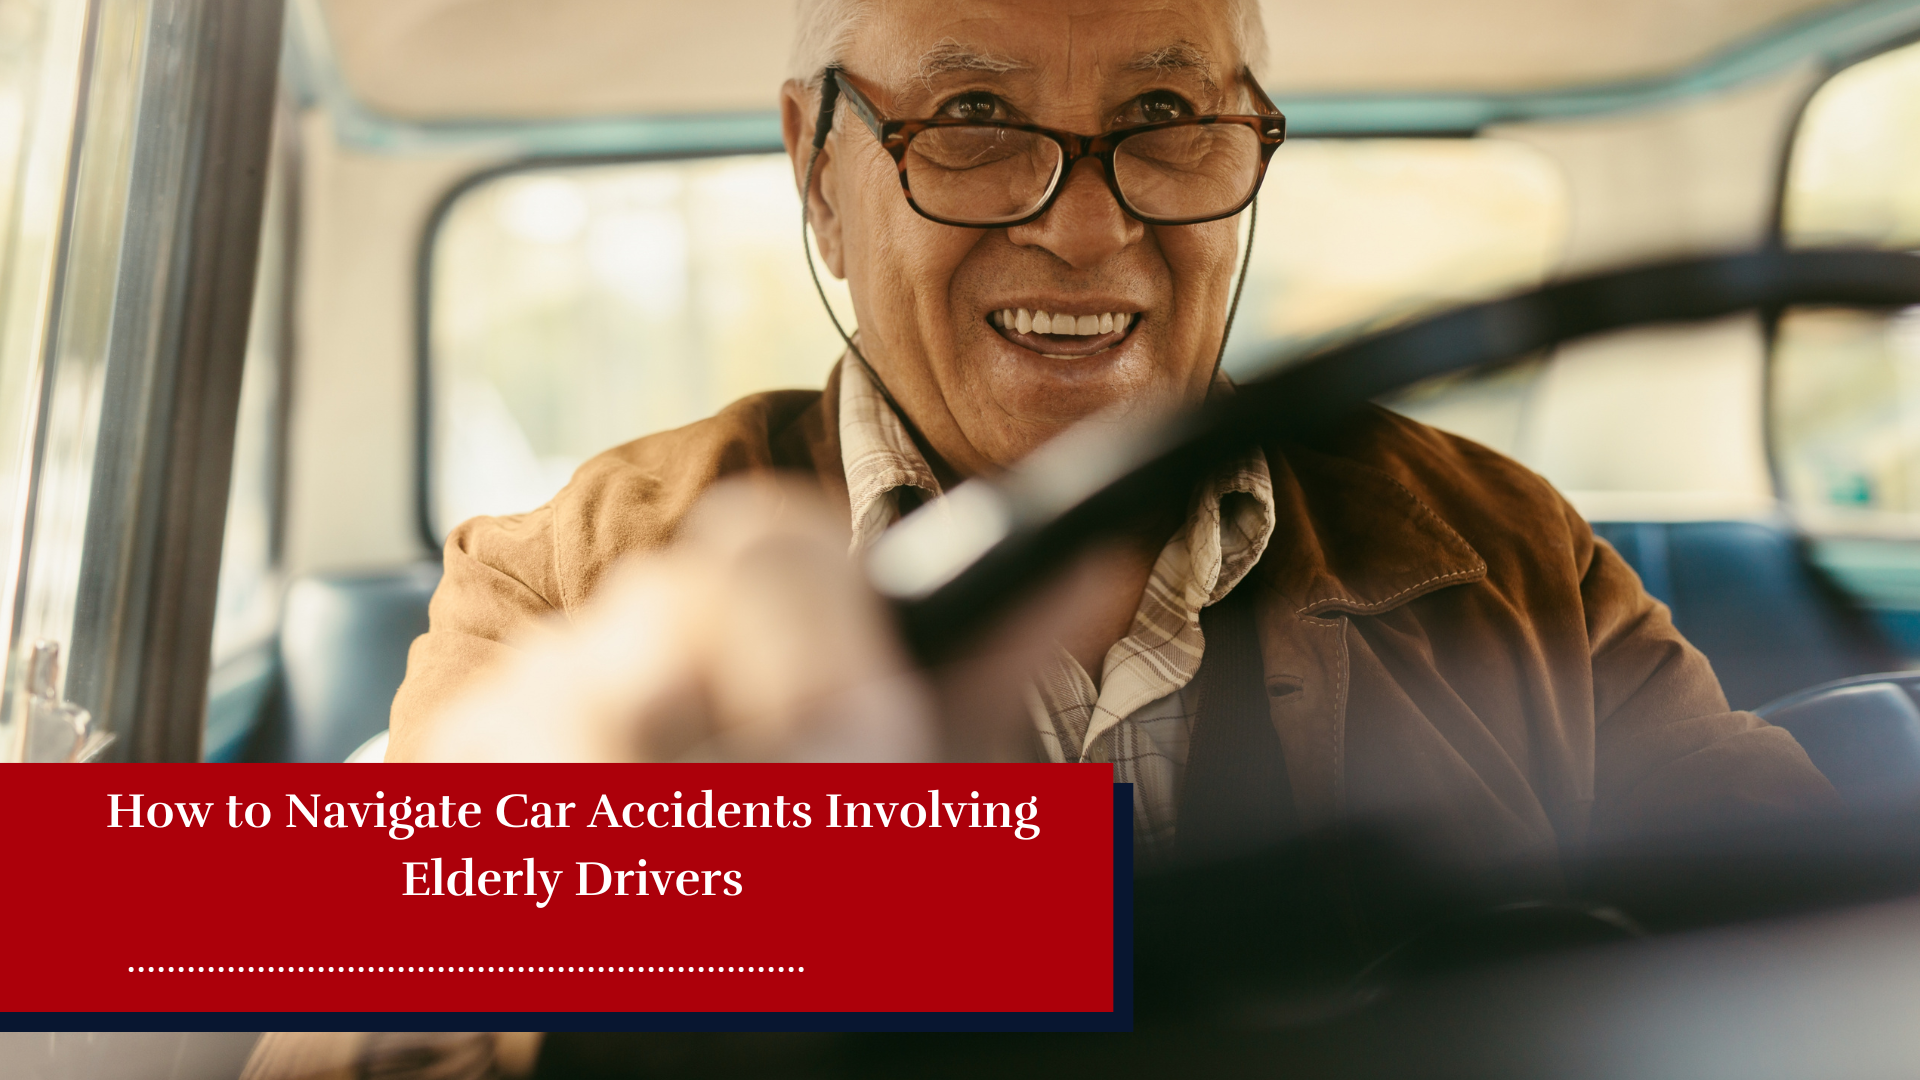 How to Navigate Car Accidents Involving Elderly Drivers